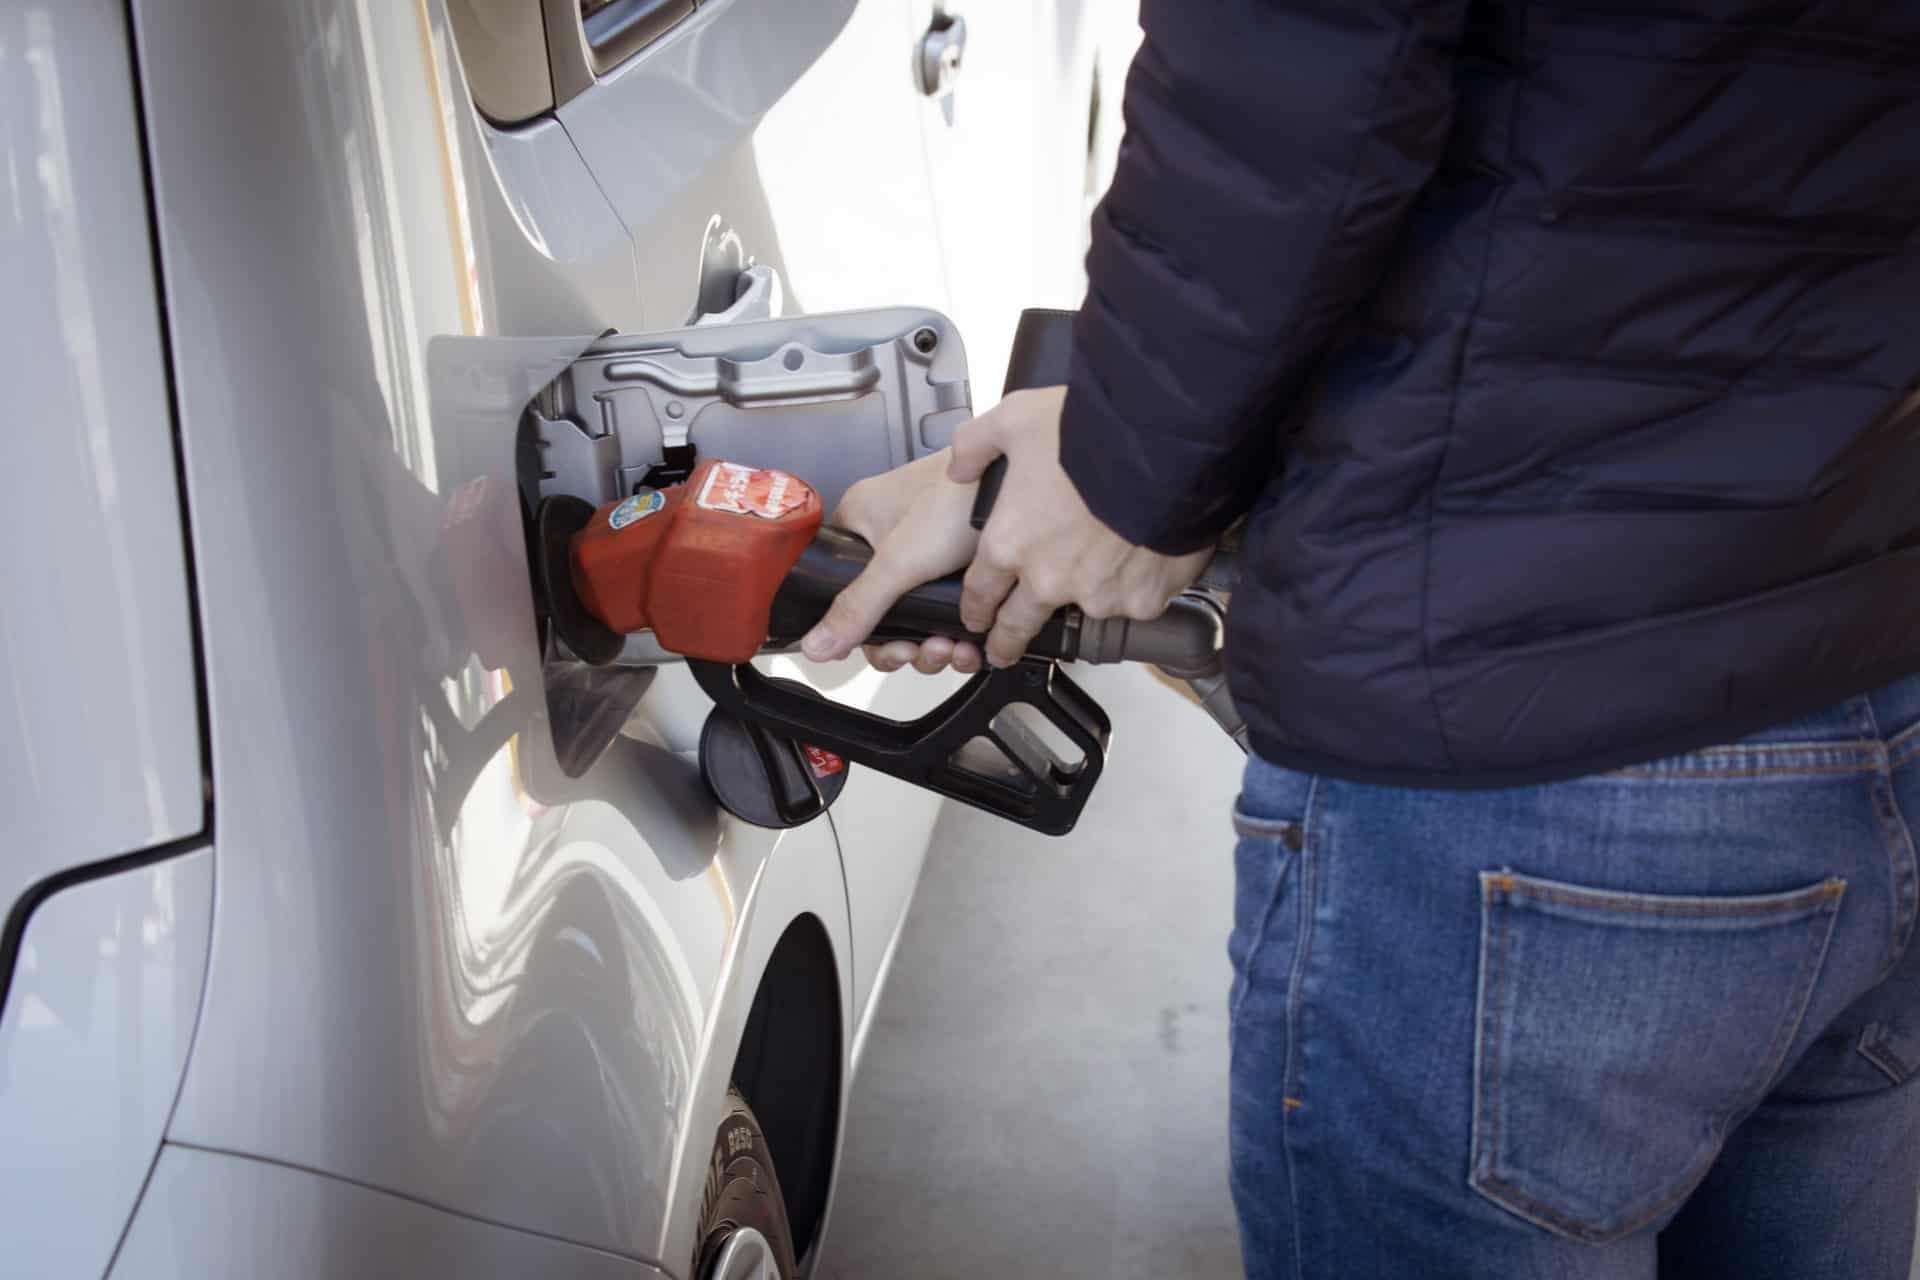 Refined or regular fuels – which is better to choose?